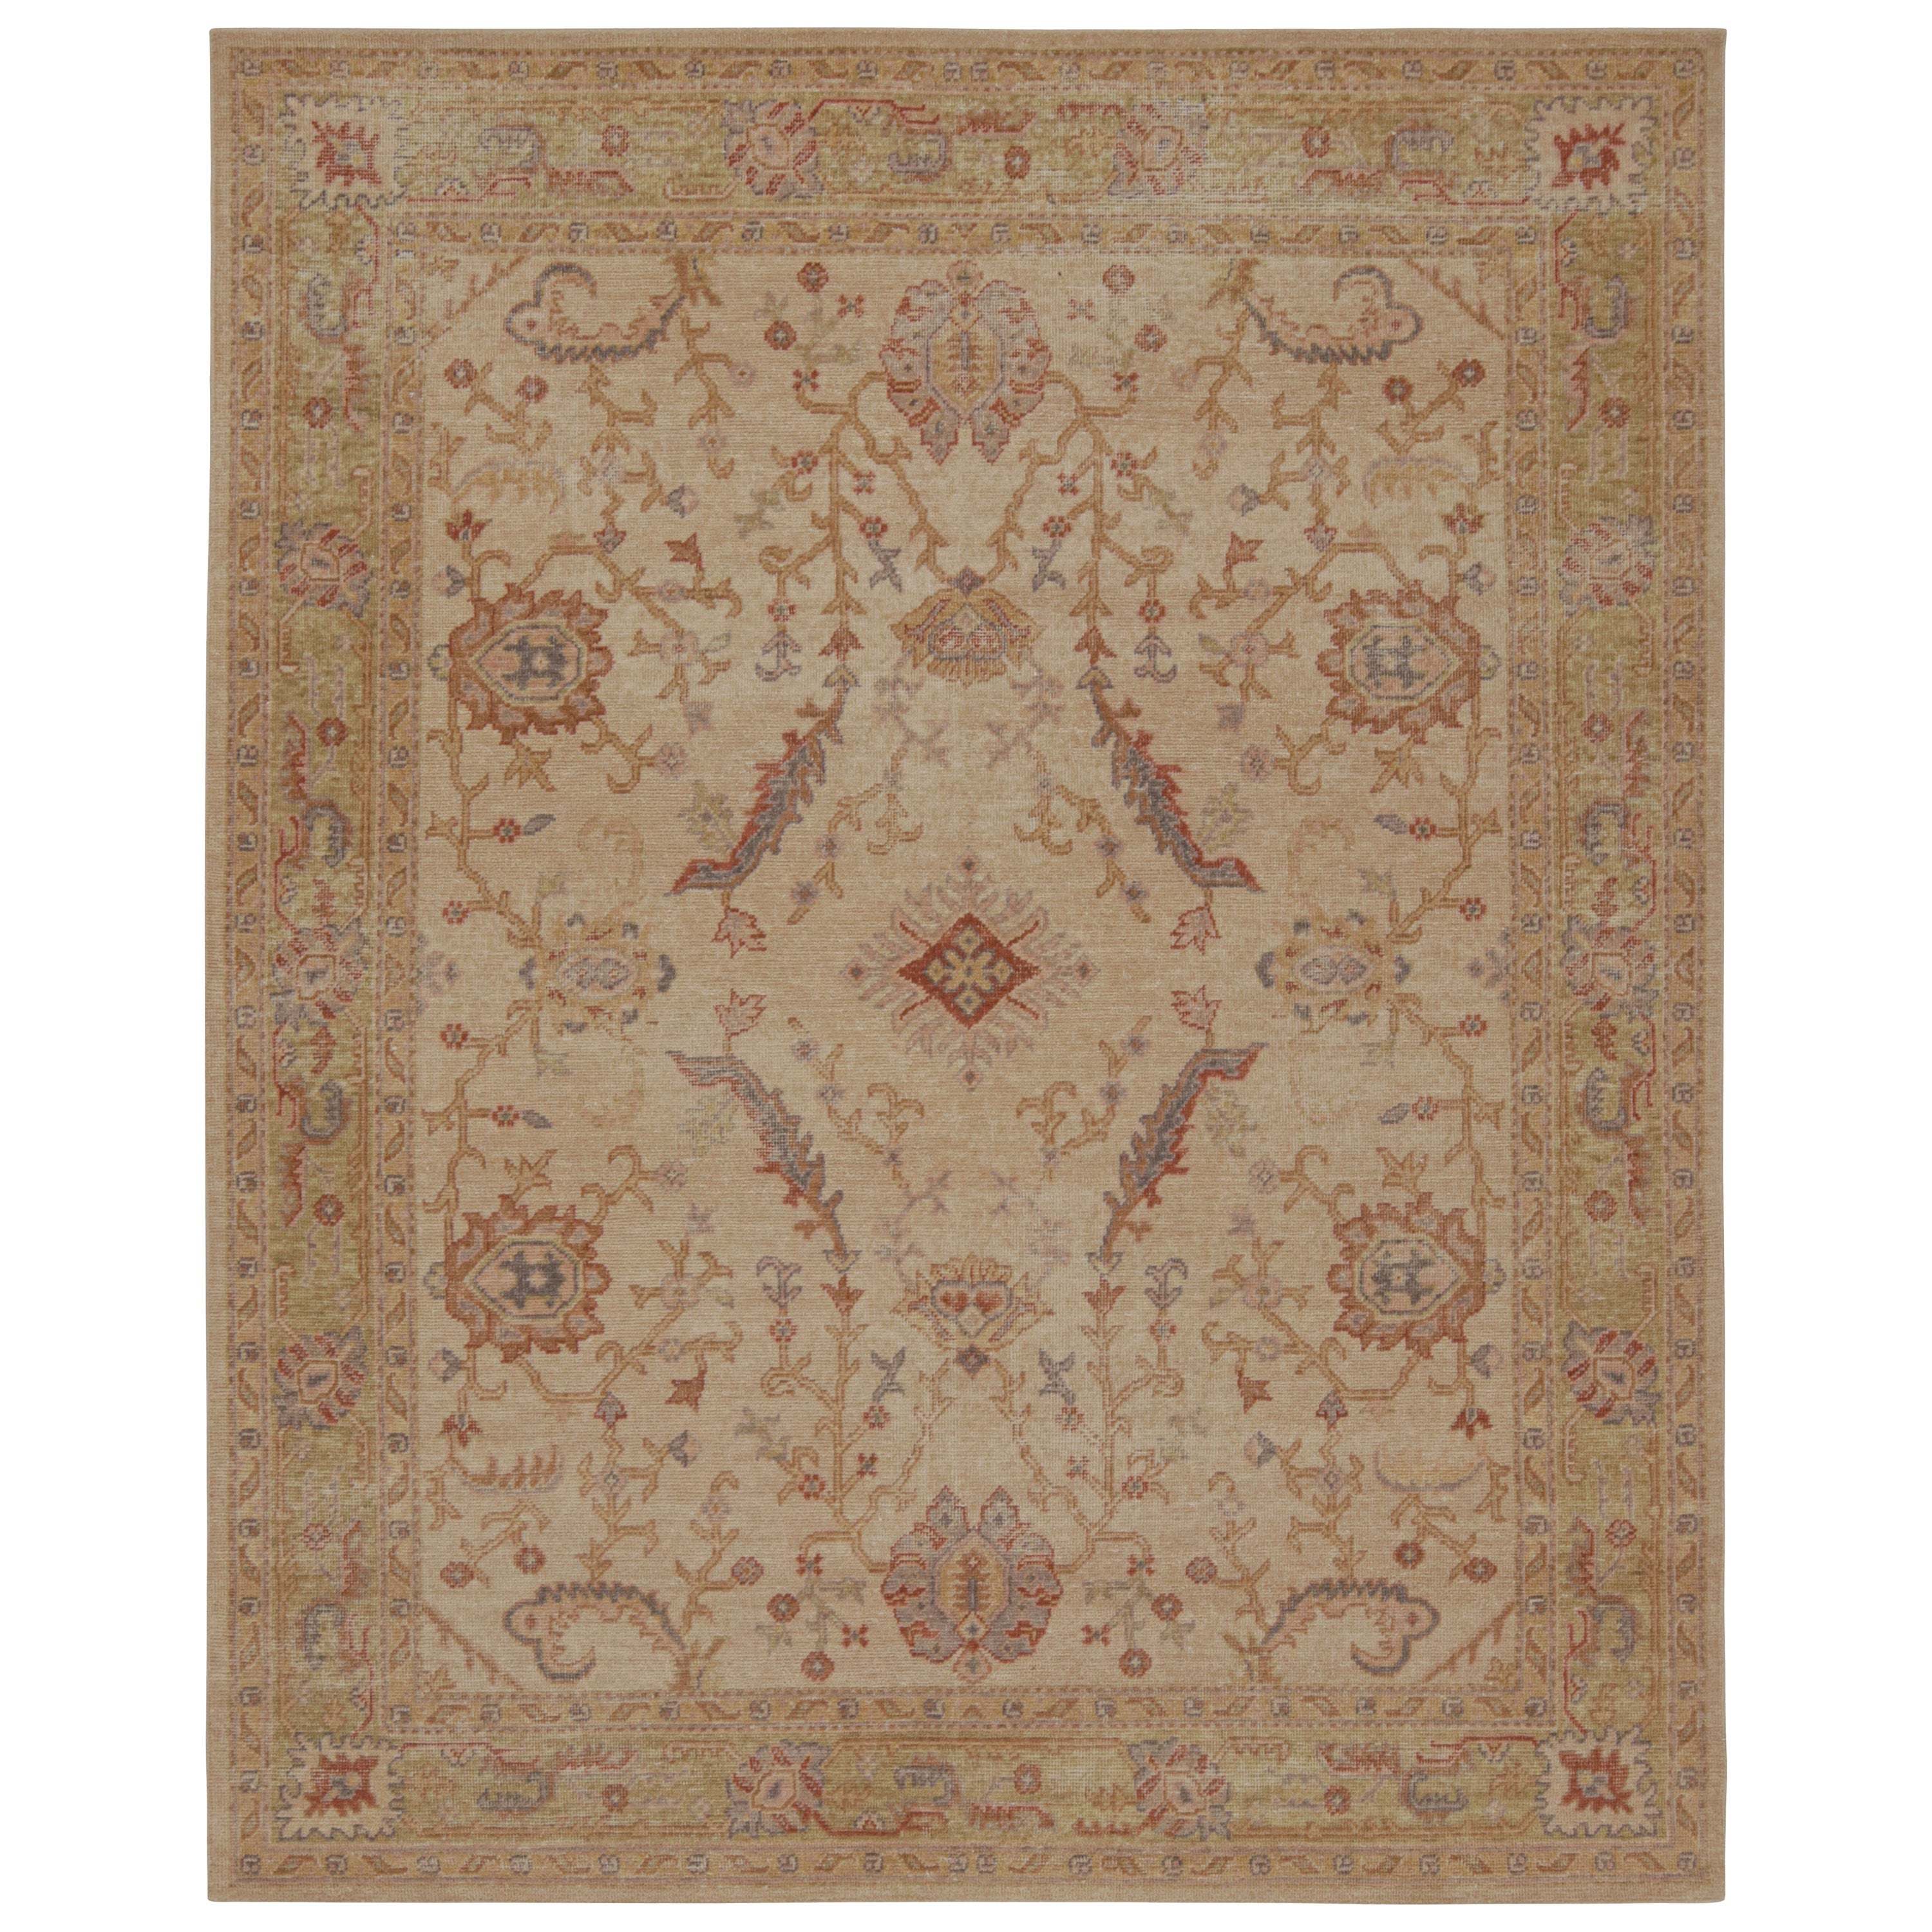 Rug & Kilim’s Distressed style Rug in Beige-Brown and Green Geometric Patterns For Sale